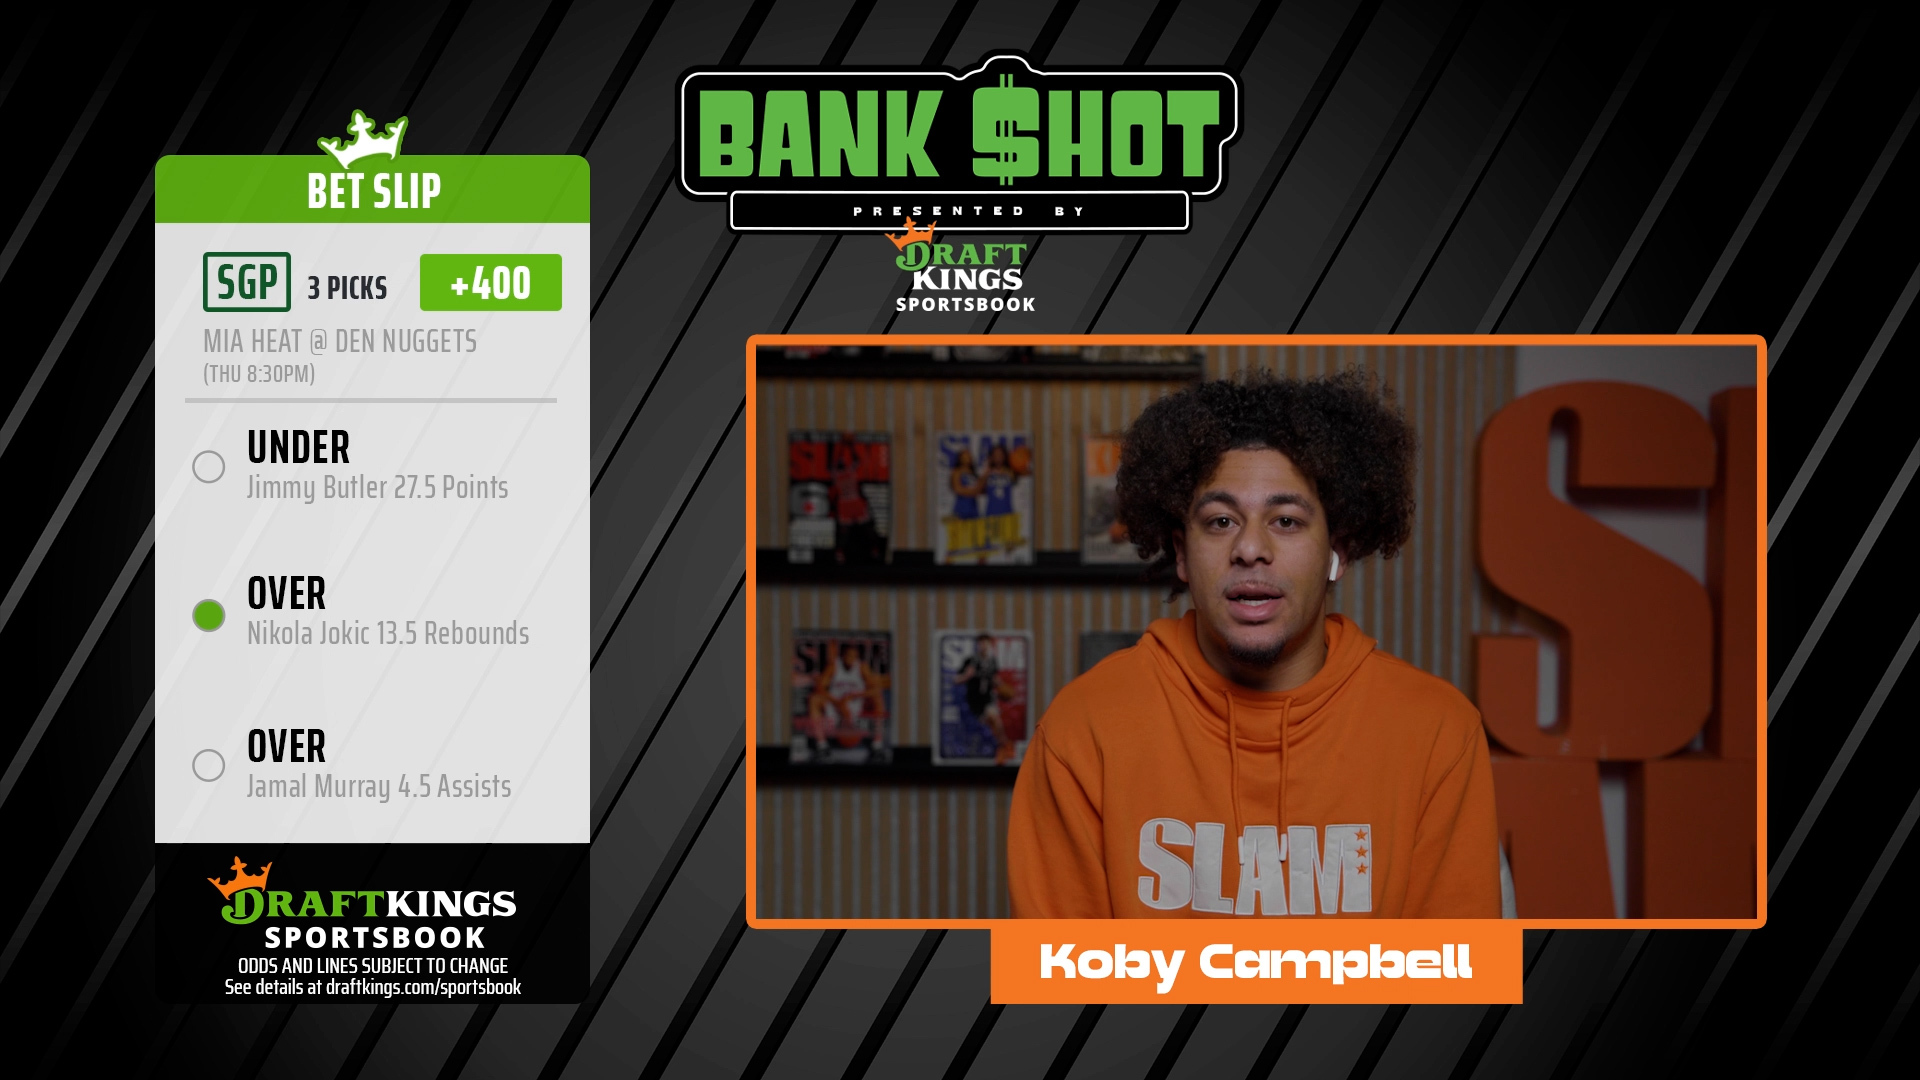 Get Ready for Game 1 of the NBA Finals with the SLAM x DraftKings BankShot